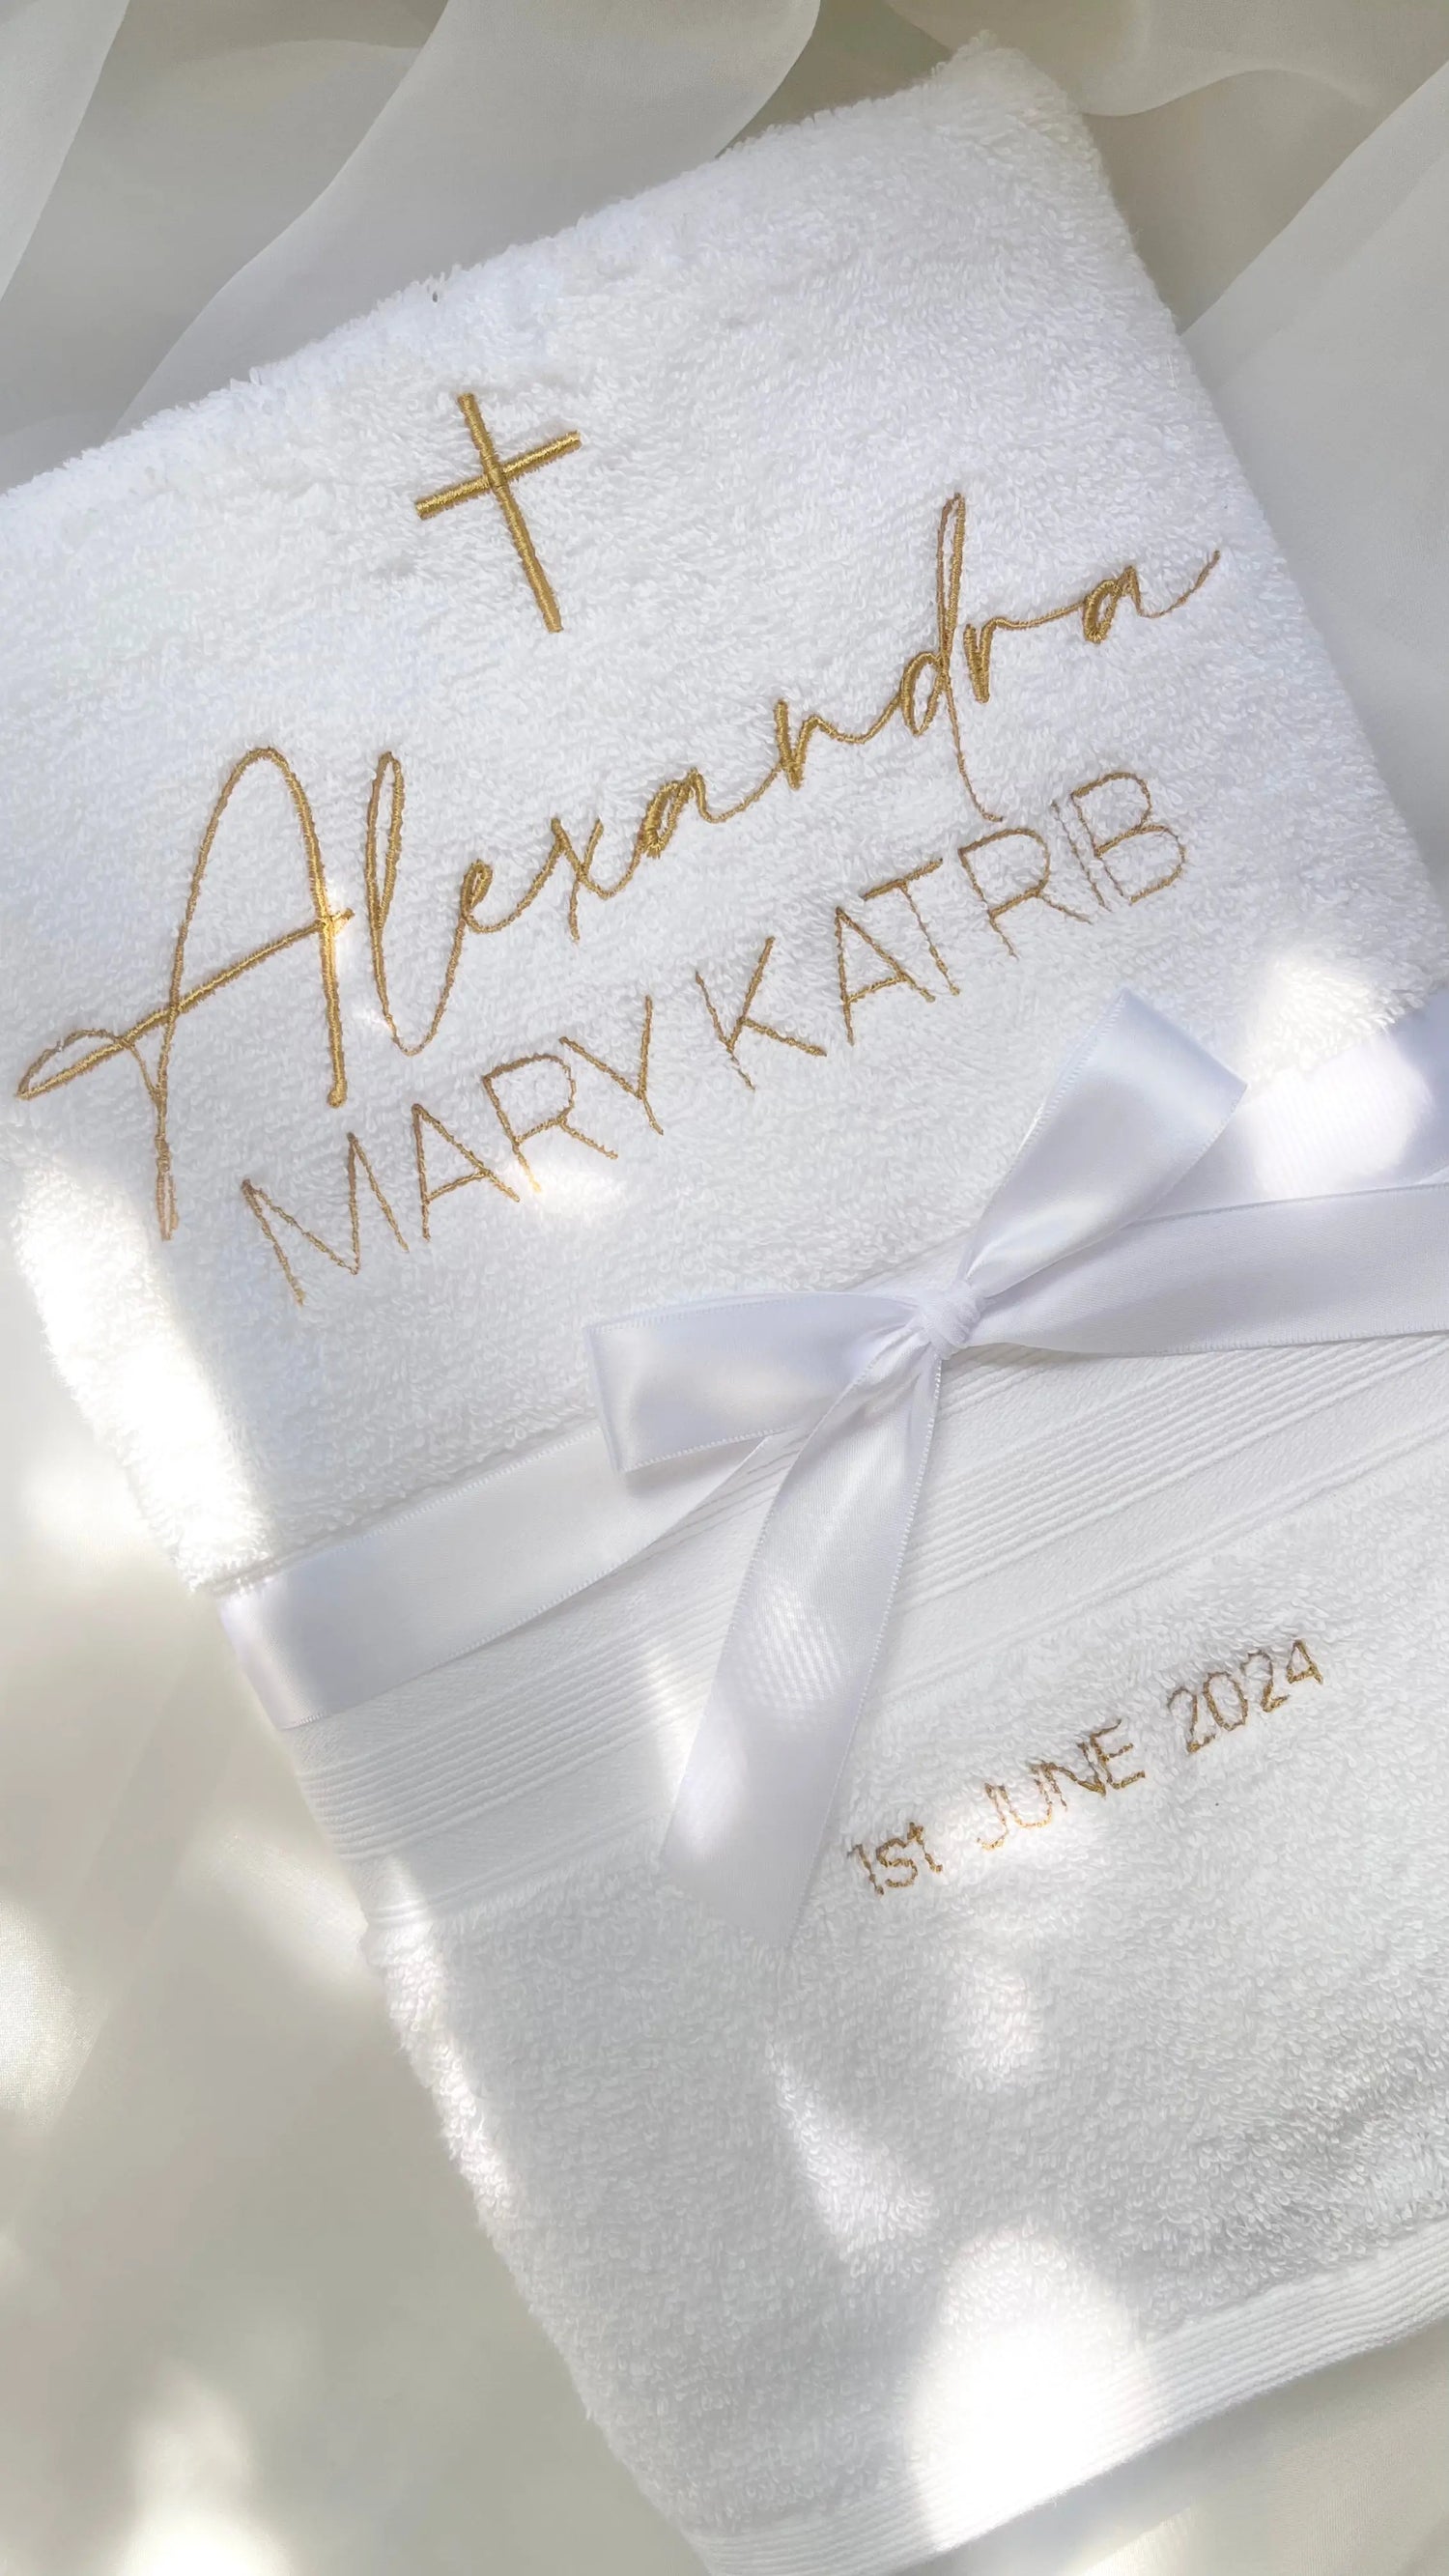 Personalised White Bath Towel with A Gold Catholic Cross, Alexandra Mary Katrib, 1st JUNE 2024. Full Name and Date. 